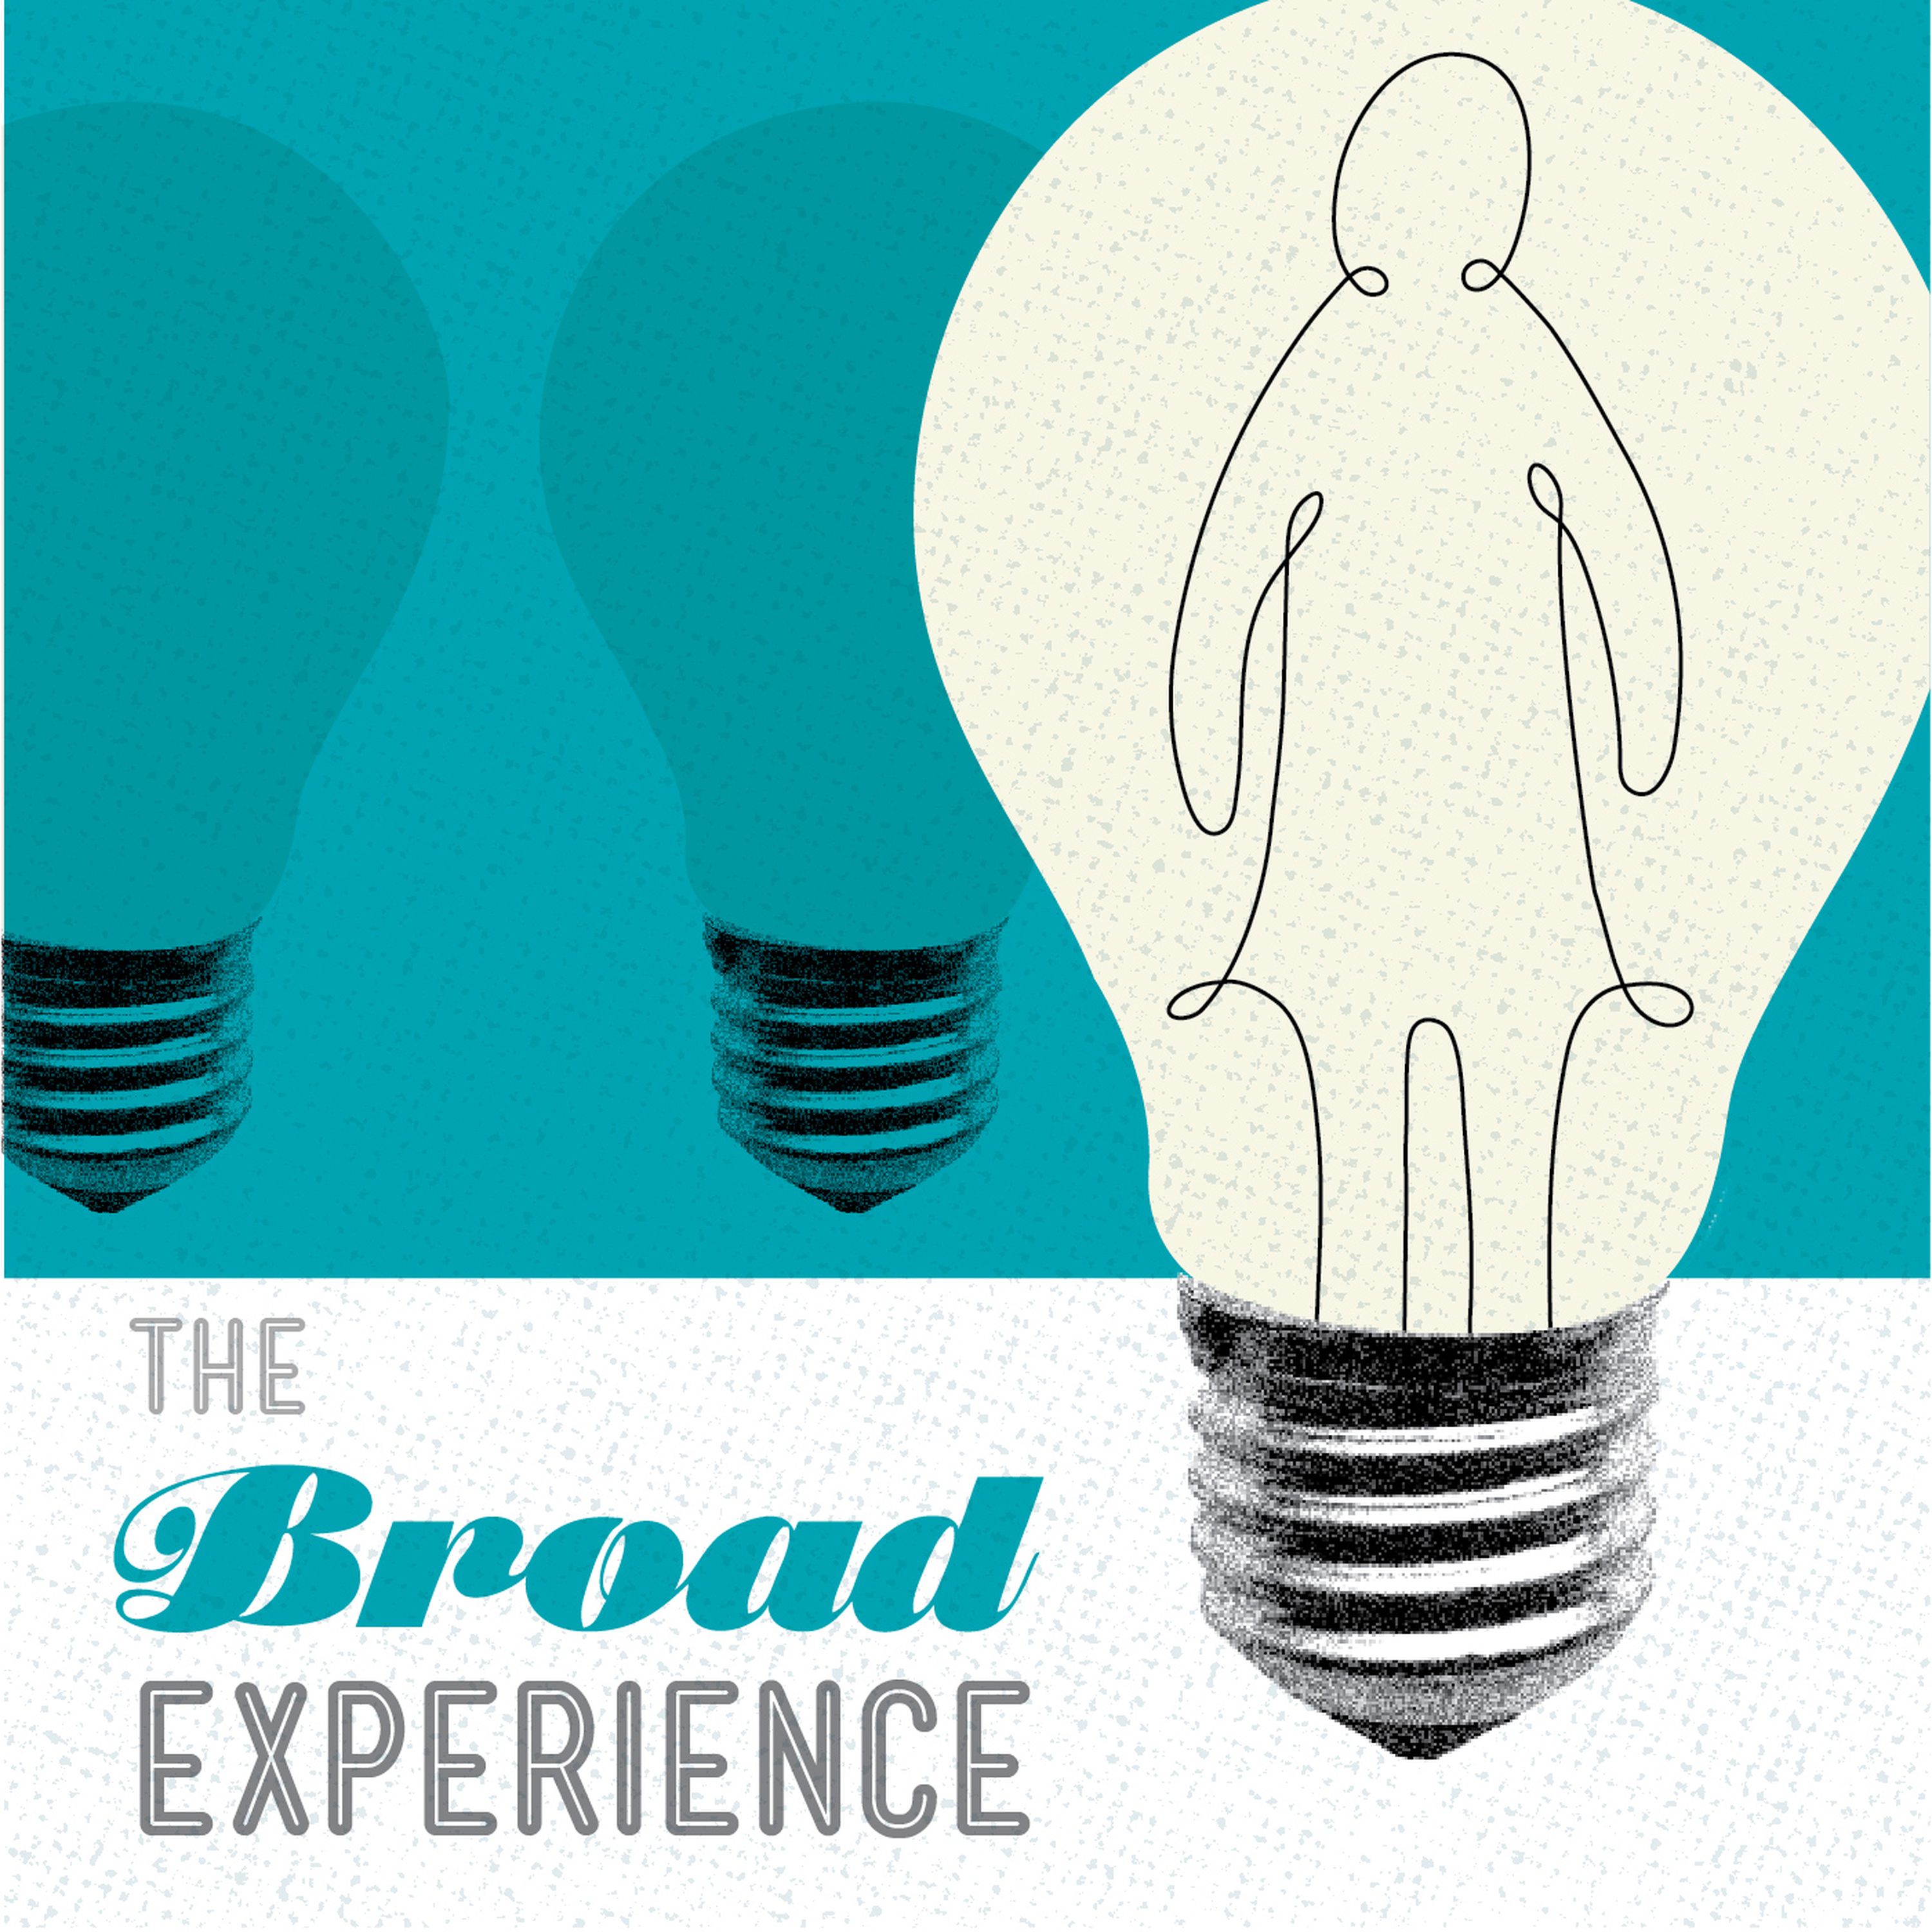 The Broad Experience 9: Ambition and Power